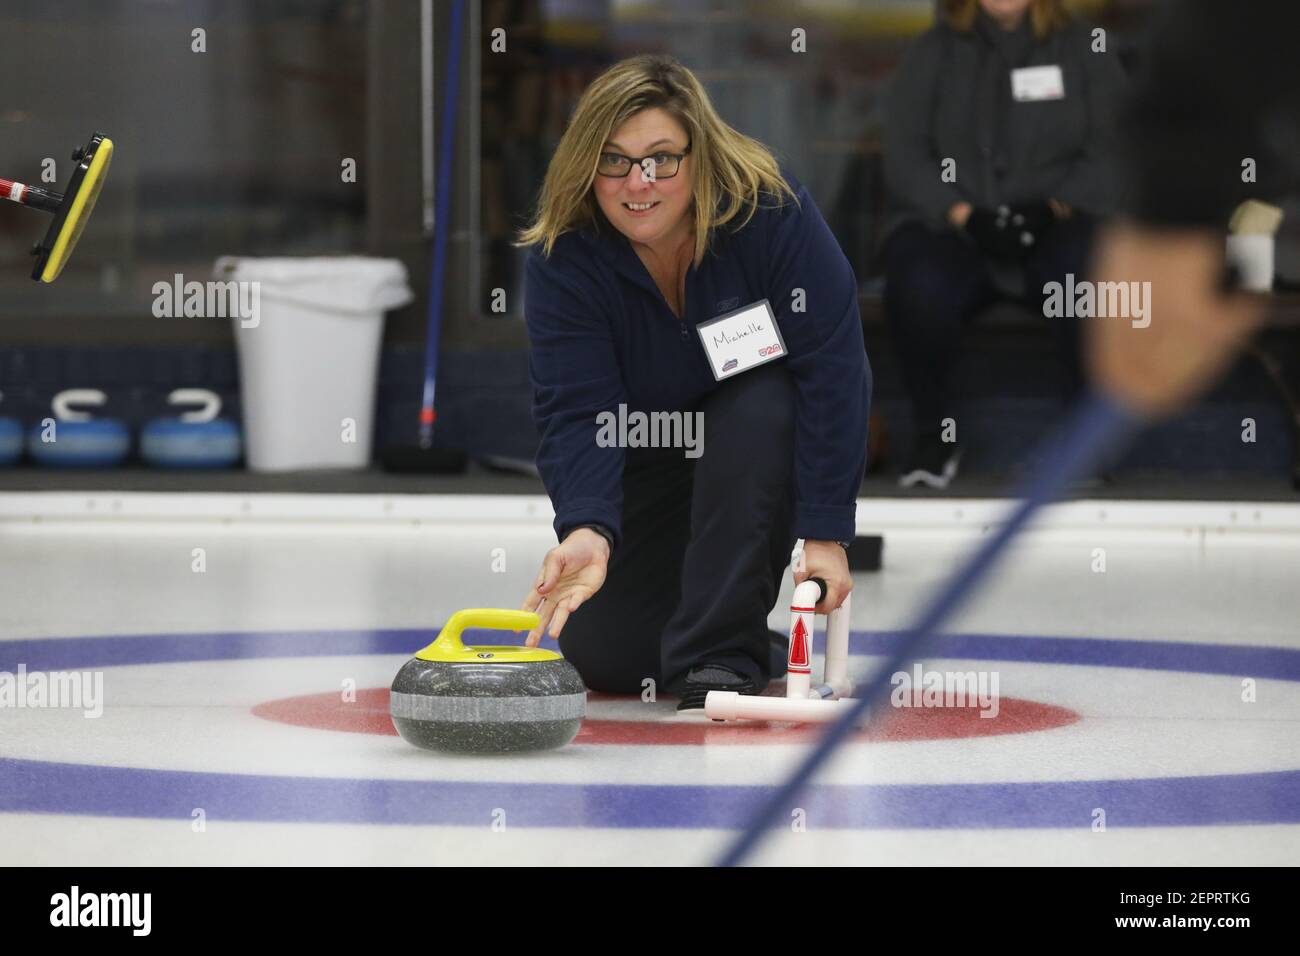 Michelle Landis launches a granite curling rock down the ice during a Learn2Curl class at the Chicago Curling Club on January 10, 2018, in Northbrook, Ill. The Club is celebrating its 70th year. (Photo by Stacey Wescott/Chicago Tribune/TNS/Sipa USA) Stock Photo